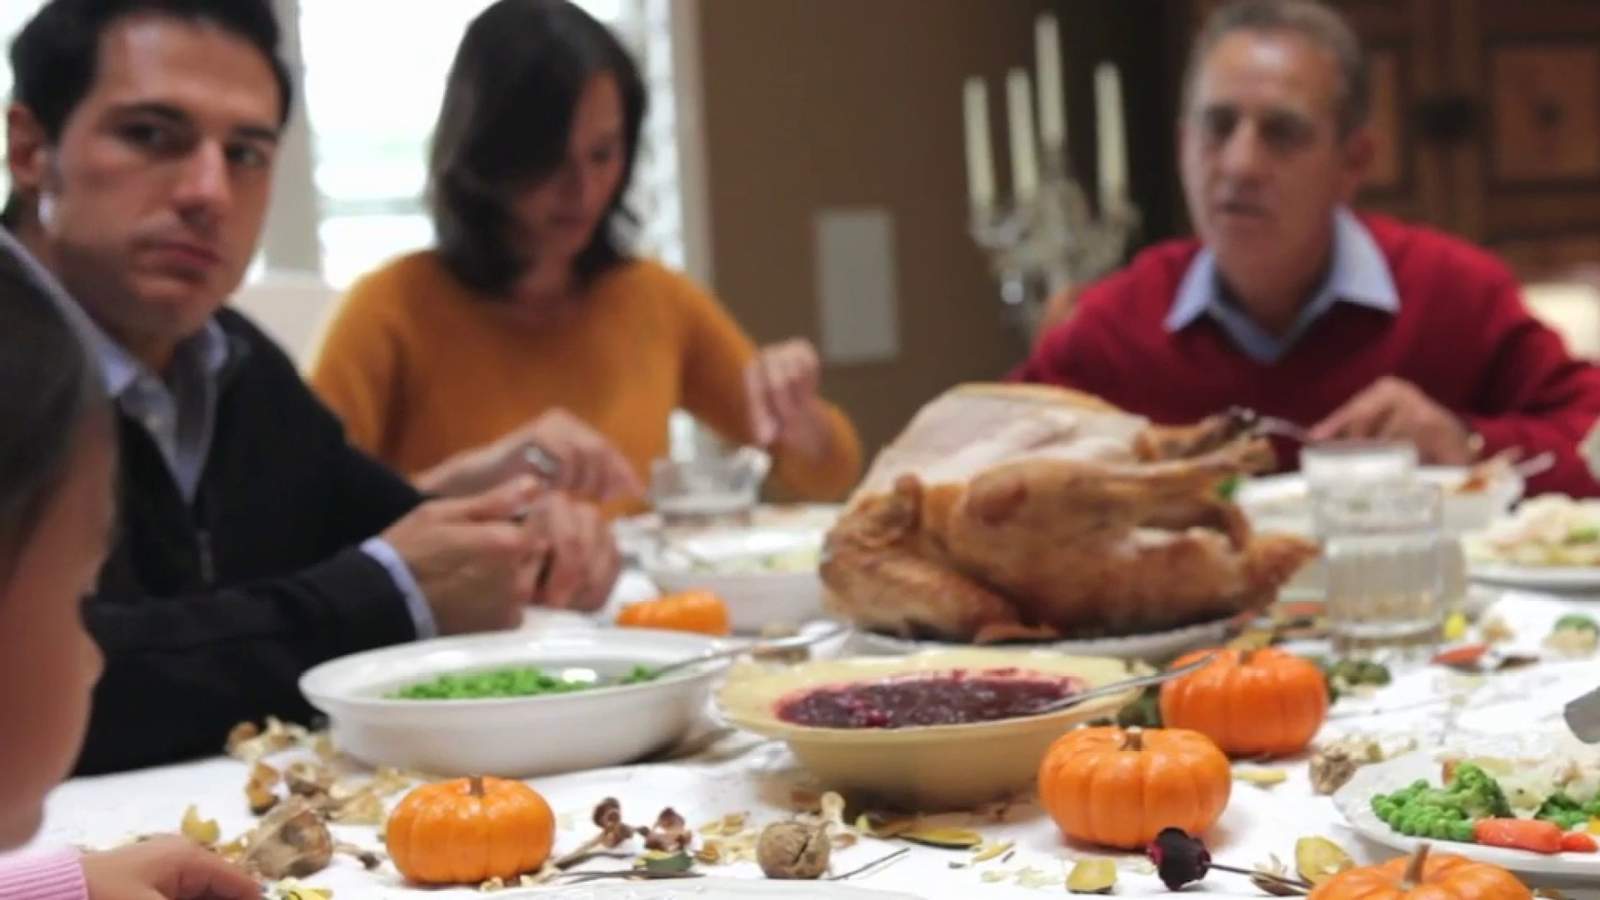 Conversations you should avoid having with your loved ones during Thanksgiving dinner